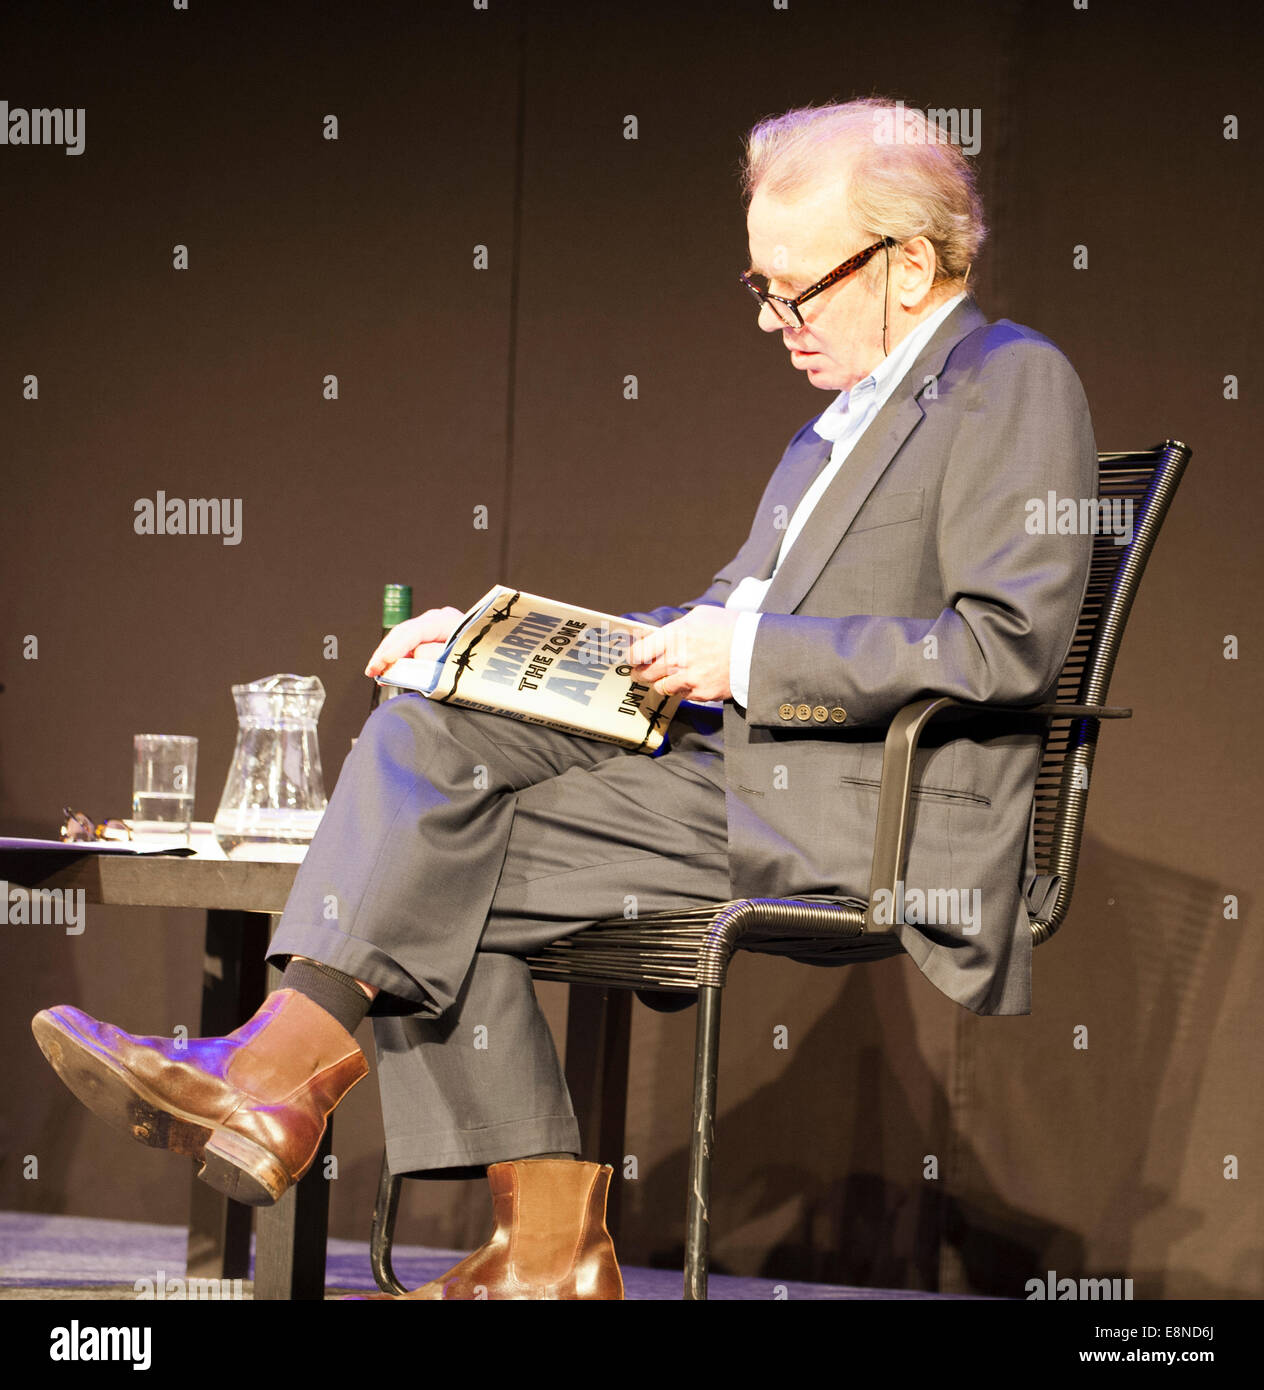 Martin Amis novelist, writer of Money, London Fields and Times Arrow reads from  his latest book The Zone of Interest  at the Cheltenham Literary Festival Uk 2014 Credit:  Prixnews/Alamy Live News Stock Photo